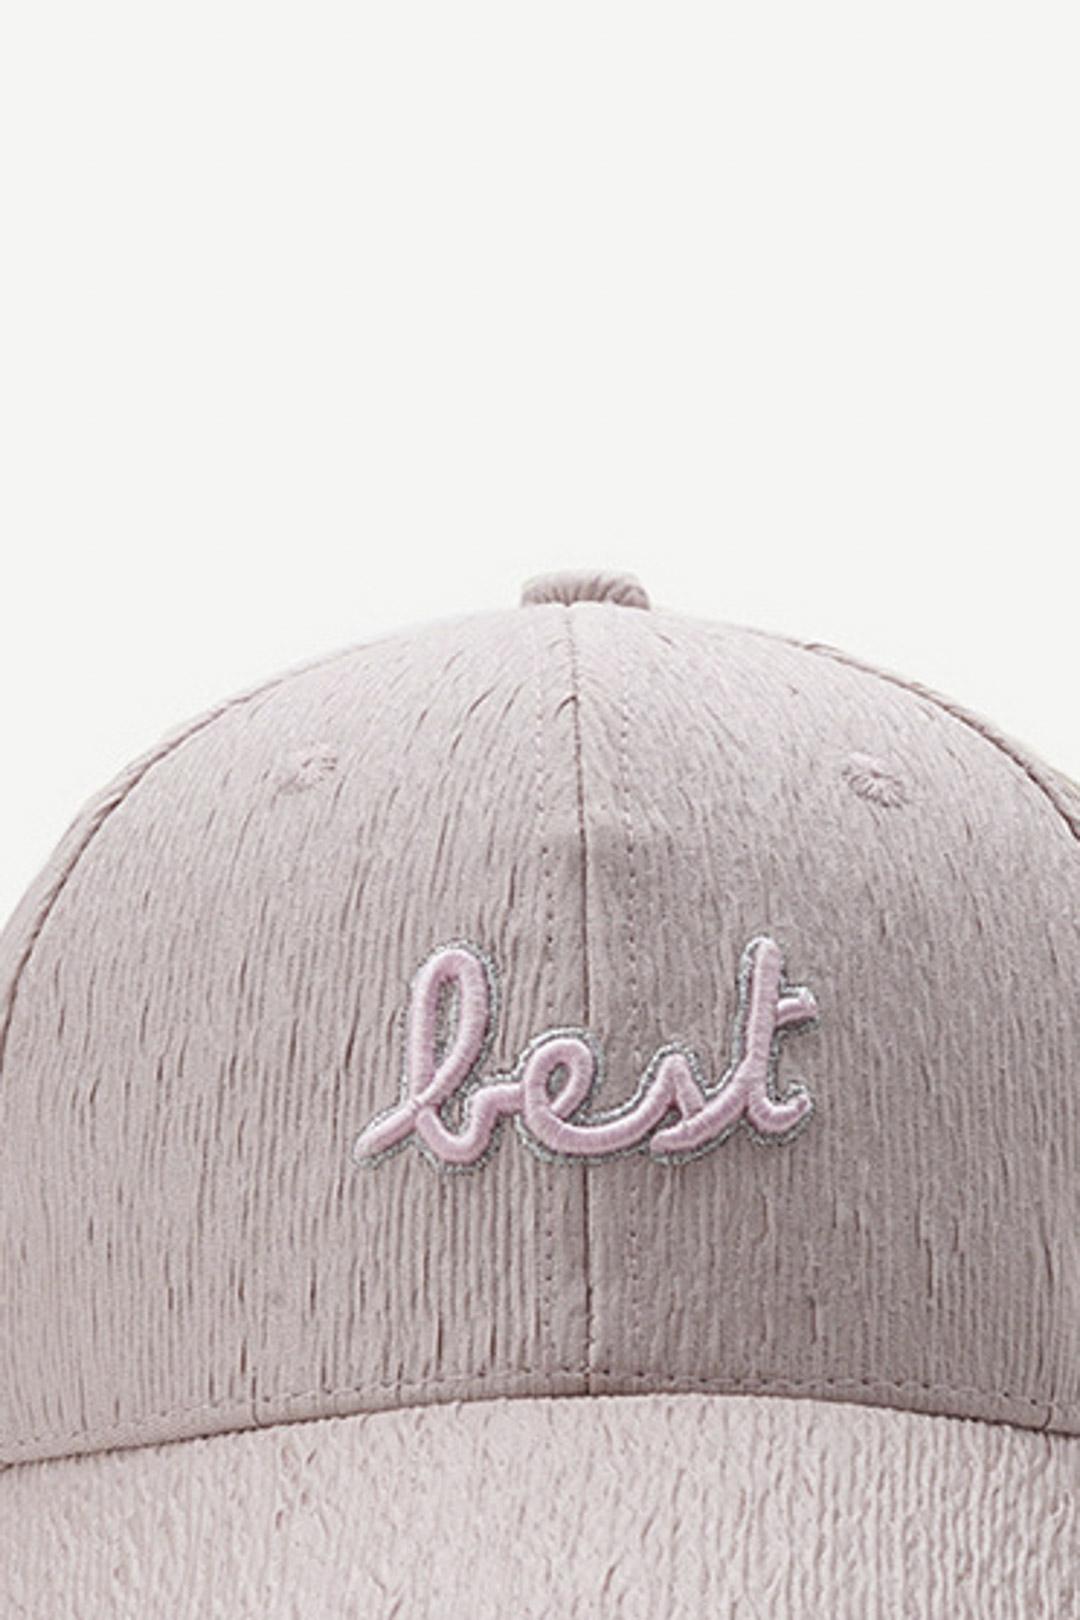 Letter Embroidered Cotton Blends Caps